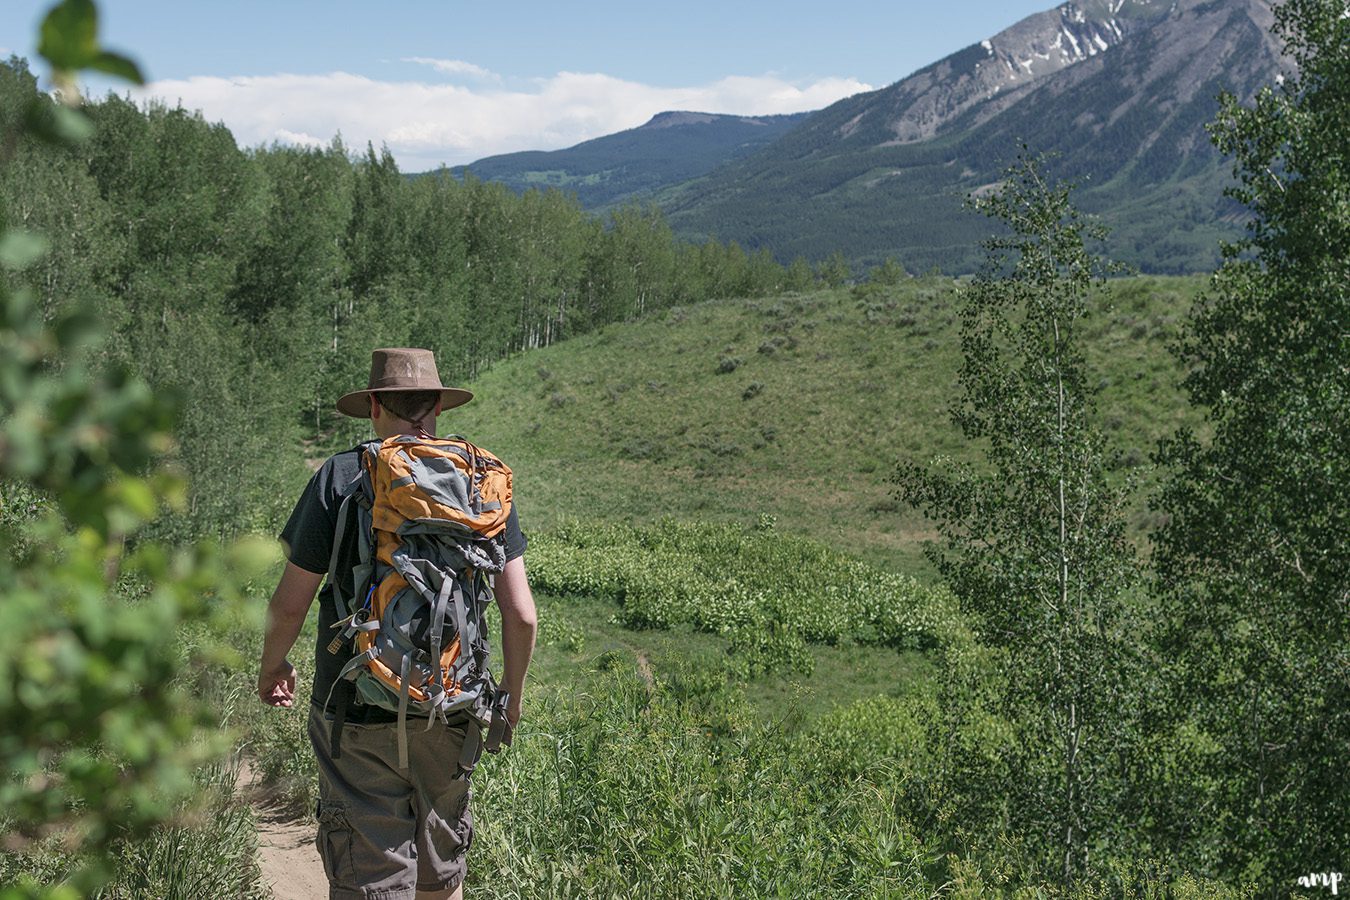 Hiking the Upper Upper Loop trail in Crested Butte